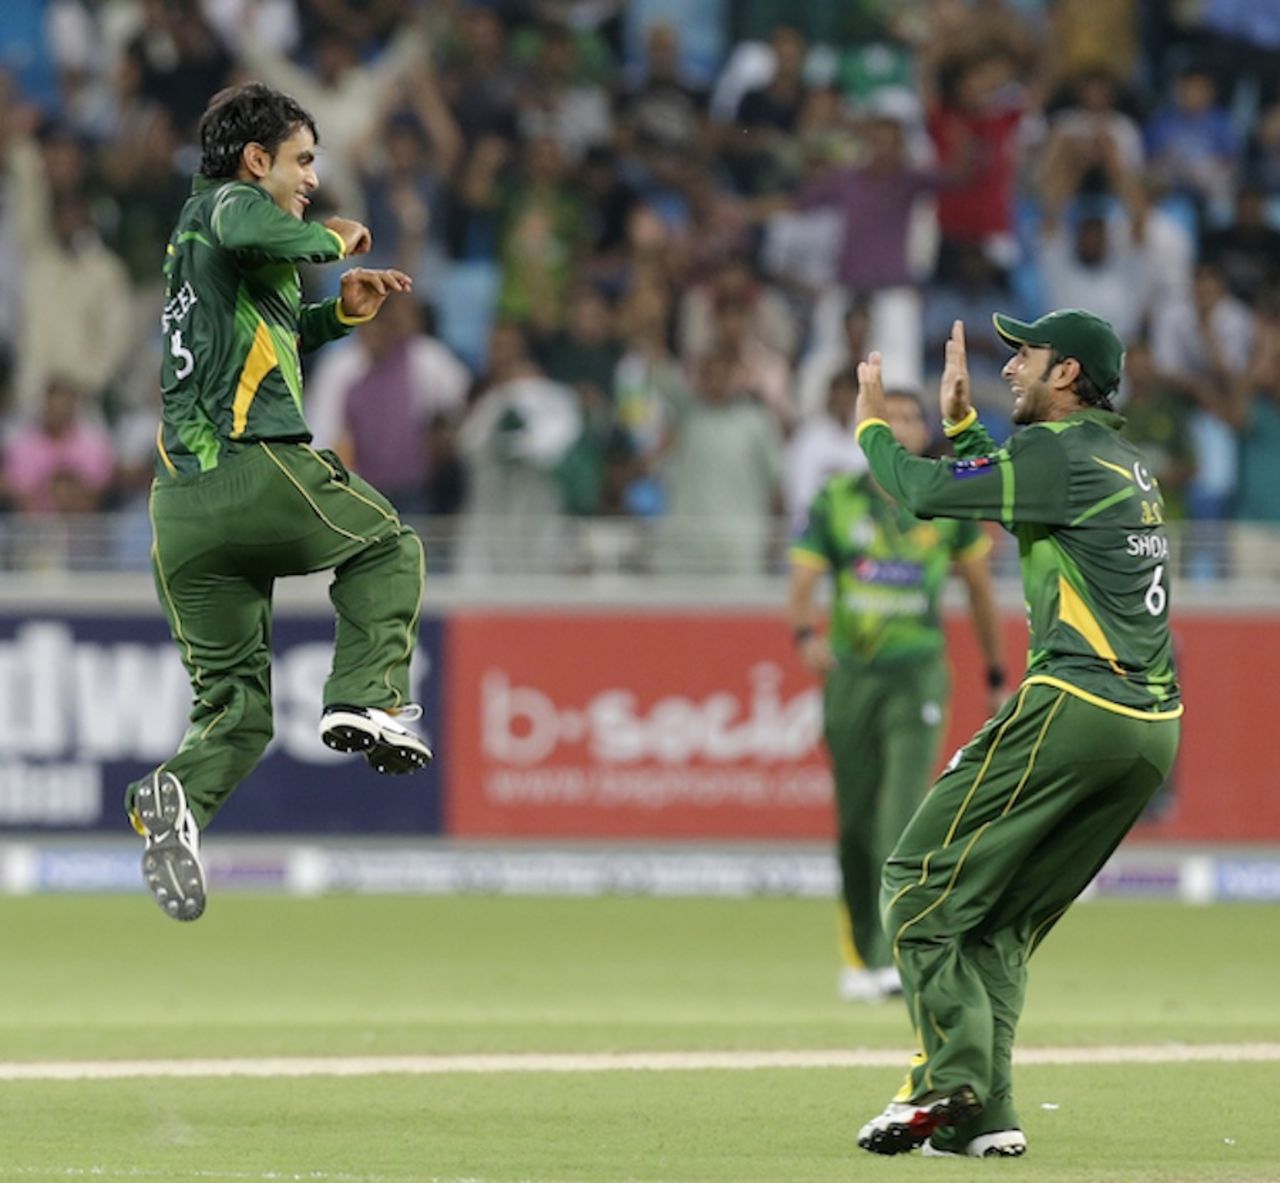 Mohammad Hafeez leaps in the air after picking David Warner's wicket, Pakistan v Australia, 1st T20I, Dubai, September 5, 2012